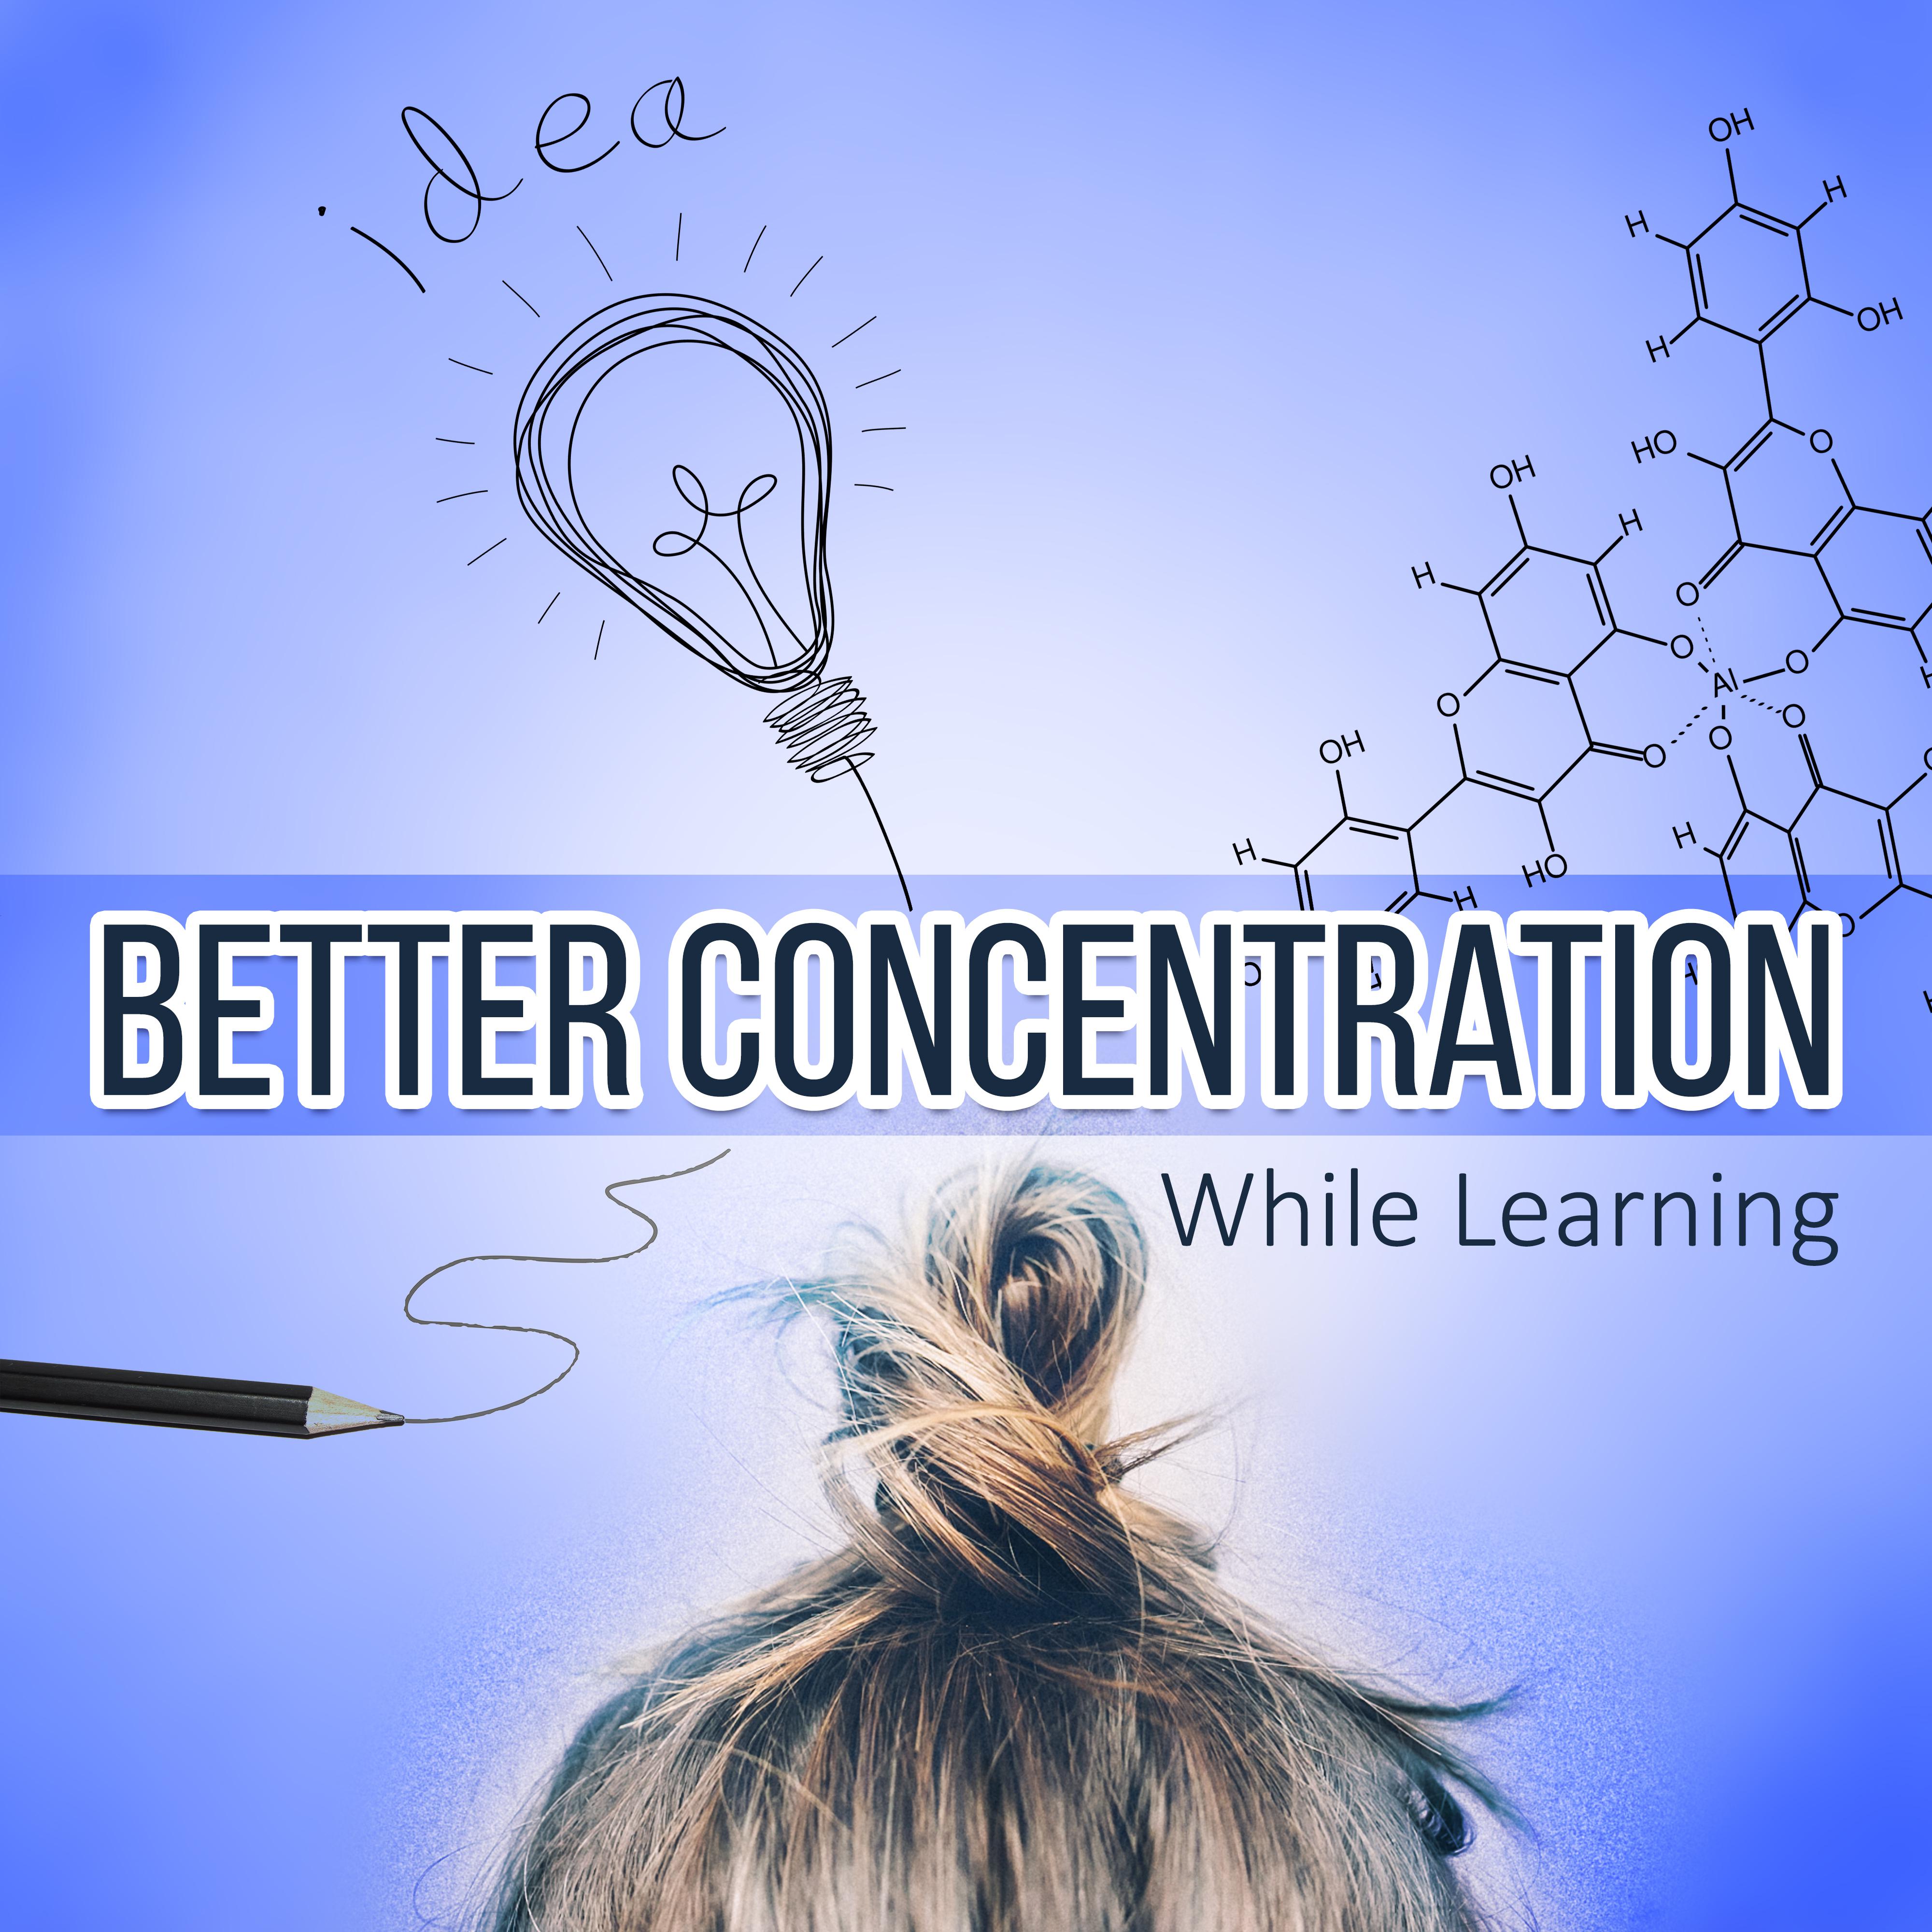 Better Concentration While Learning  Most Relaxing Music New Age for Easy Study, Concentration and Brain Power, Music Sounds of Nature for Focus, Clear the Mind, Exam Study